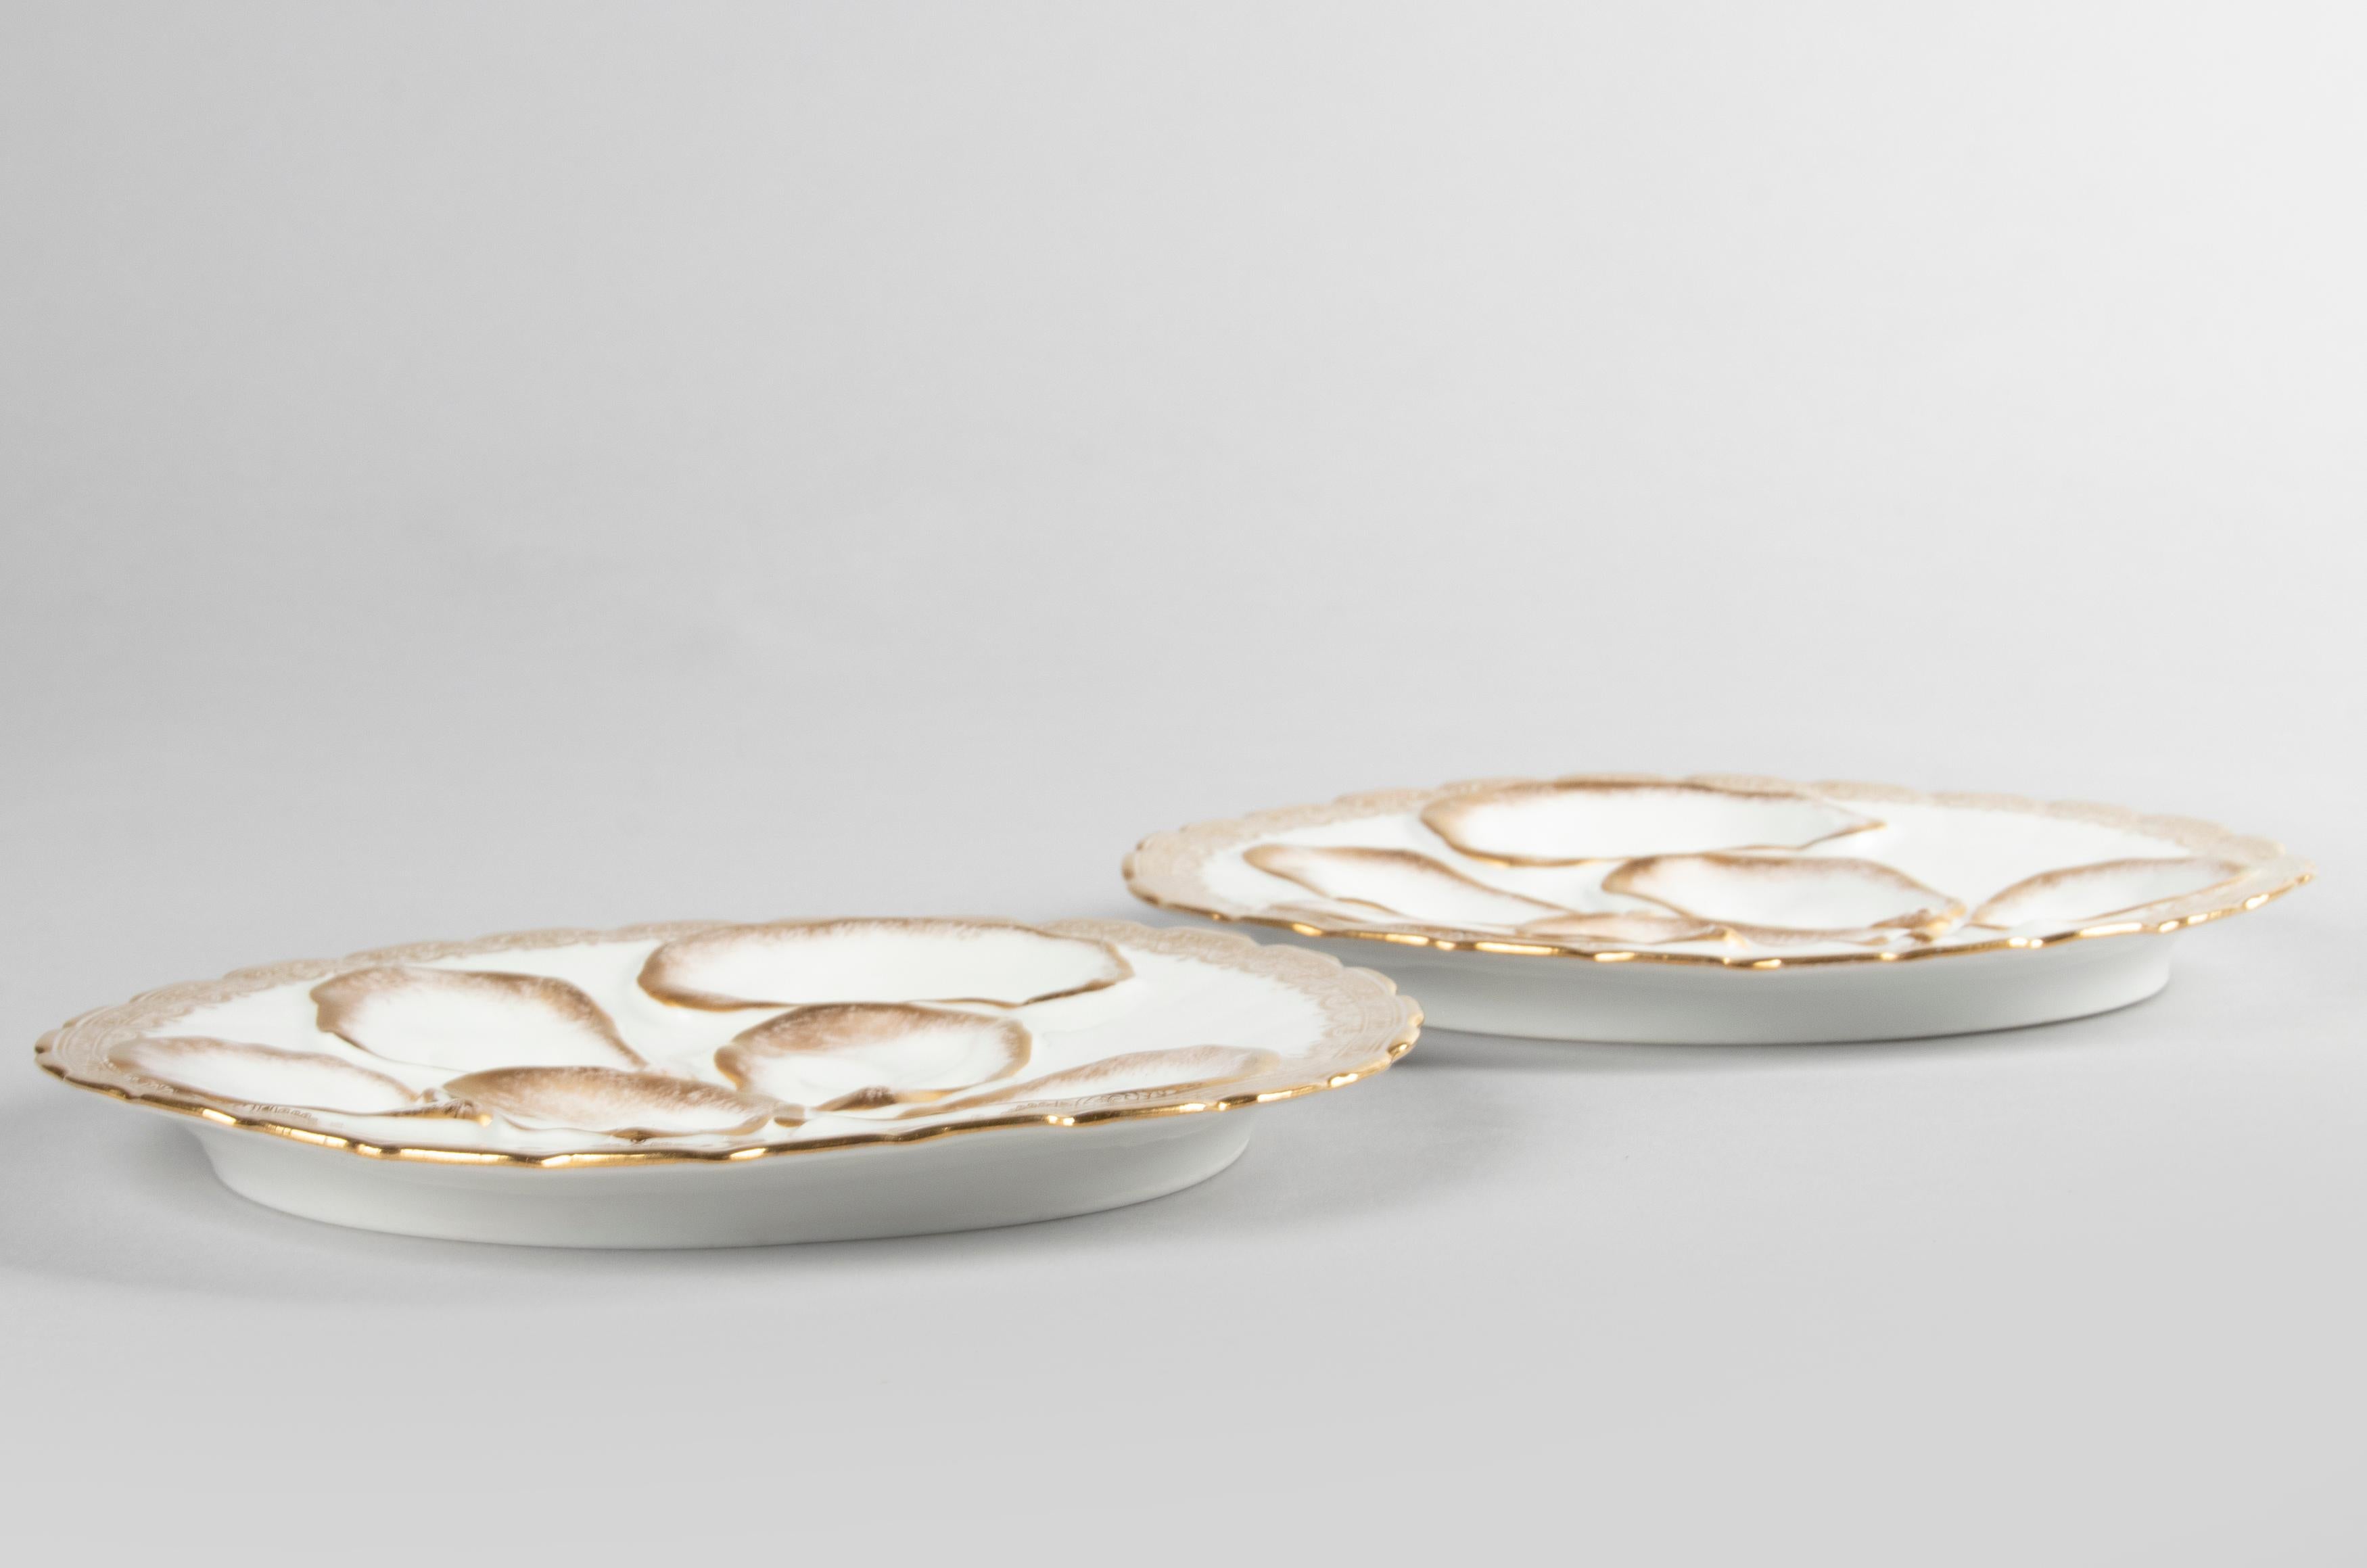 Late 19th Century Two 19th Century Porcelain Oyster Plates by Haviland Limoges